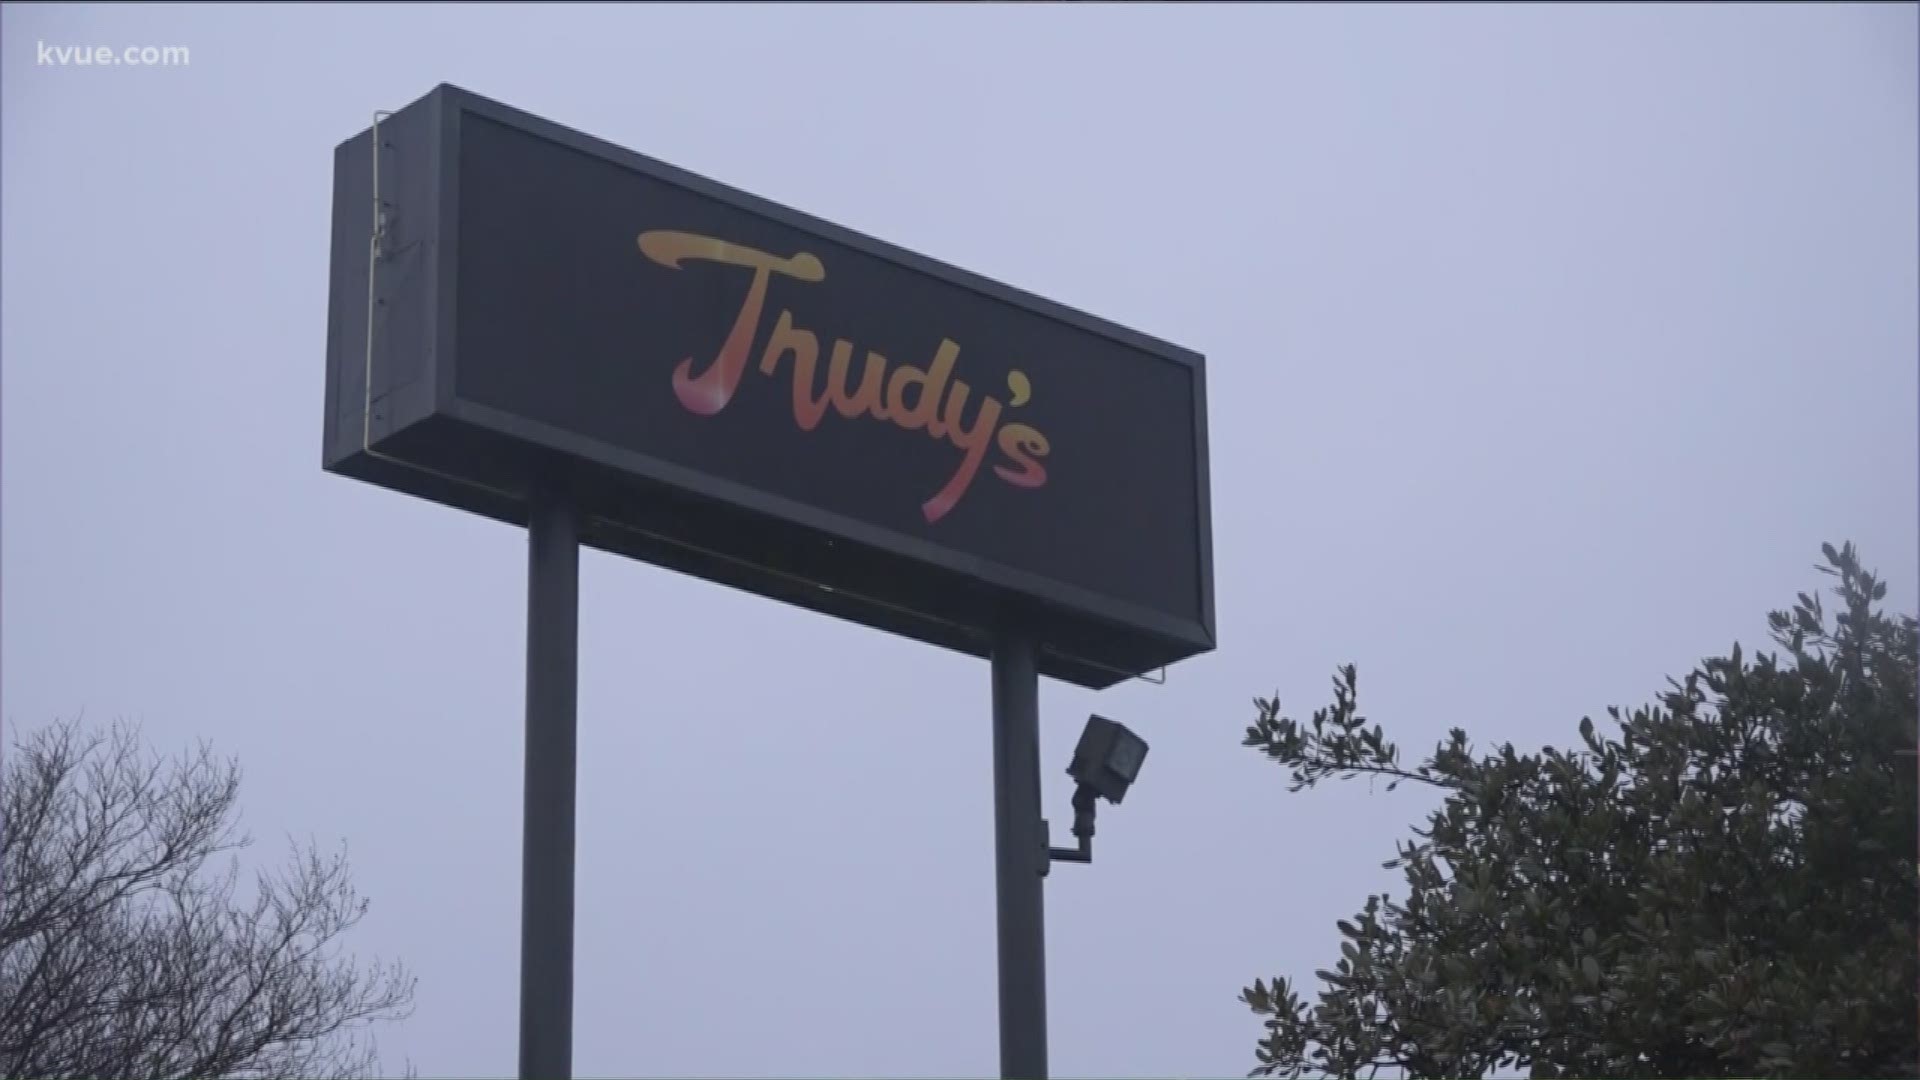 An Austin staple since 1977, Trudy's has filed for bankruptcy protection.